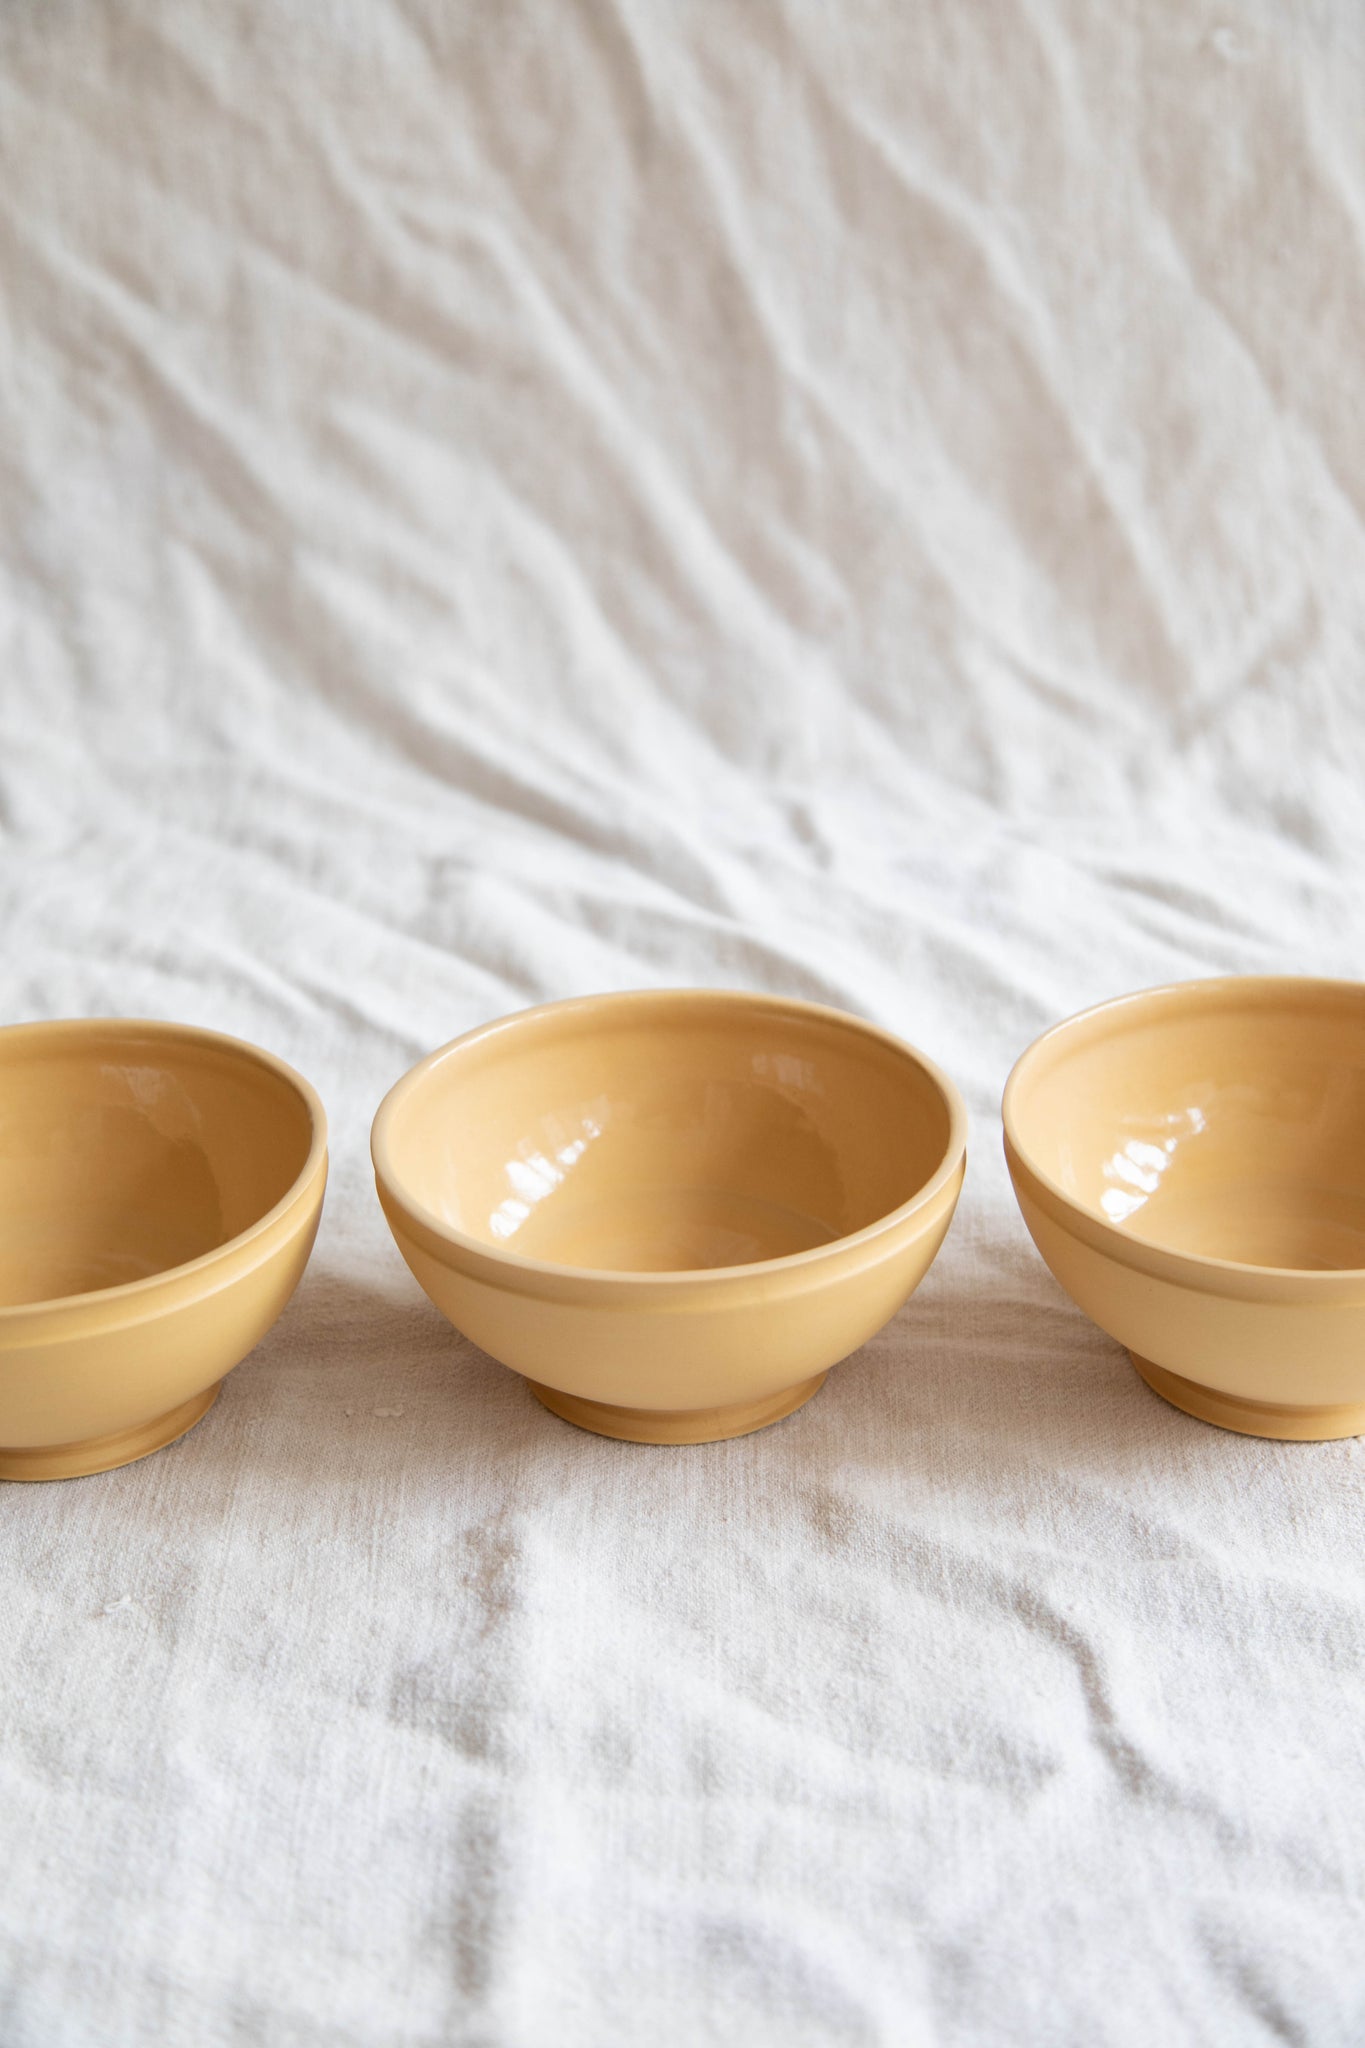 Marcie McGoldrick | Footed Bowl in Maize